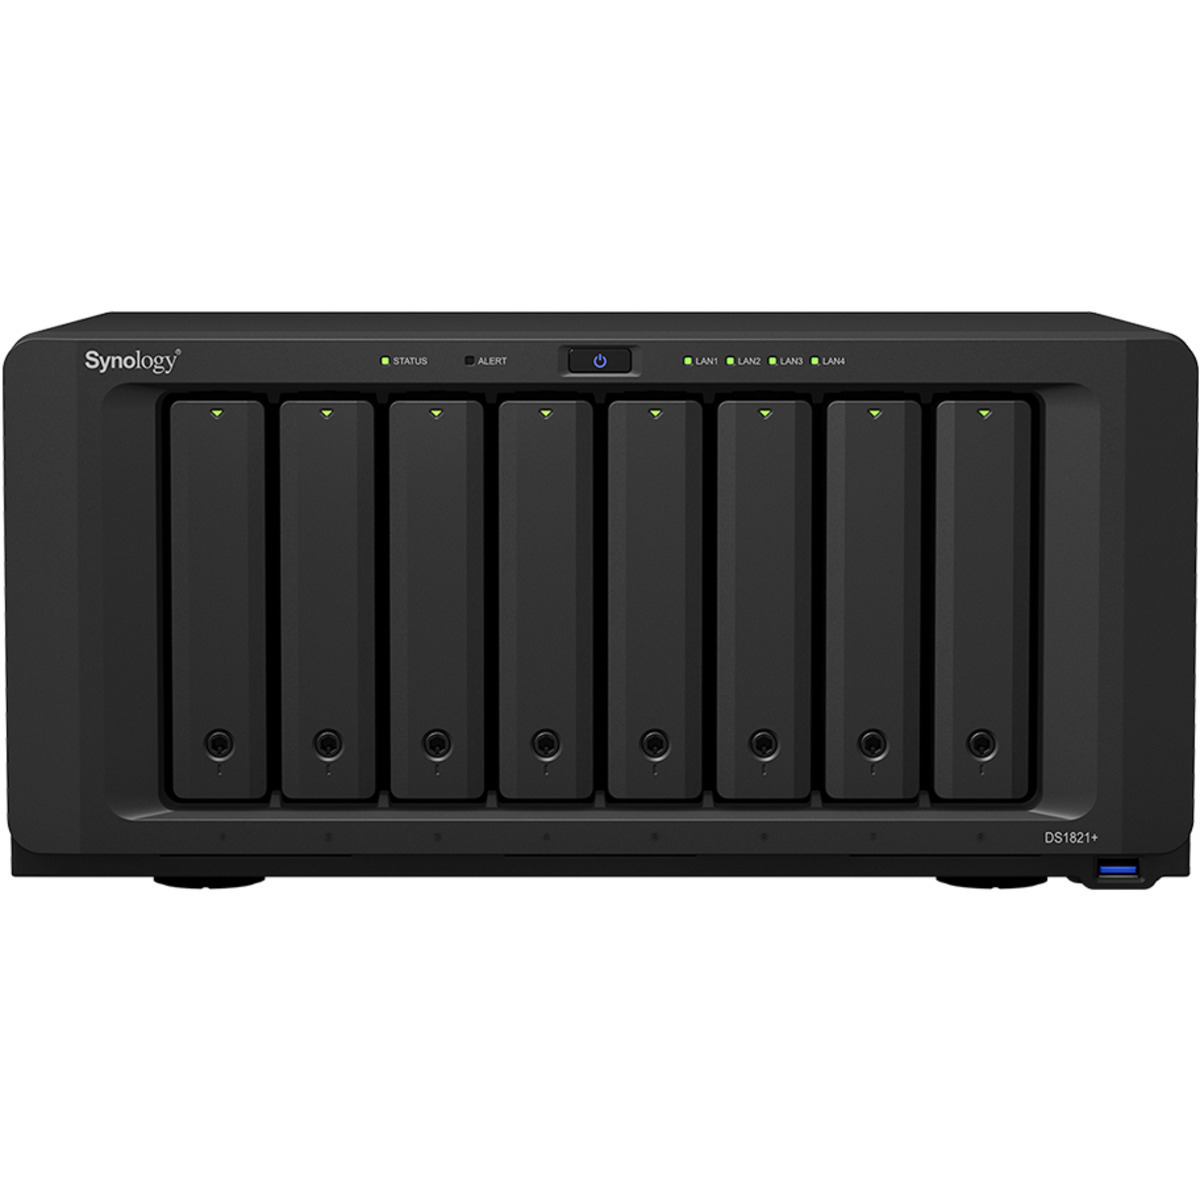 Synology DiskStation DS1821+ 96tb 8-Bay Desktop Multimedia / Power User / Business NAS - Network Attached Storage Device 8x12tb Western Digital Ultrastar DC HC520 HUH721212ALE600 3.5 7200rpm SATA 6Gb/s HDD ENTERPRISE Class Drives Installed - Burn-In Tested - FREE RAM UPGRADE DiskStation DS1821+